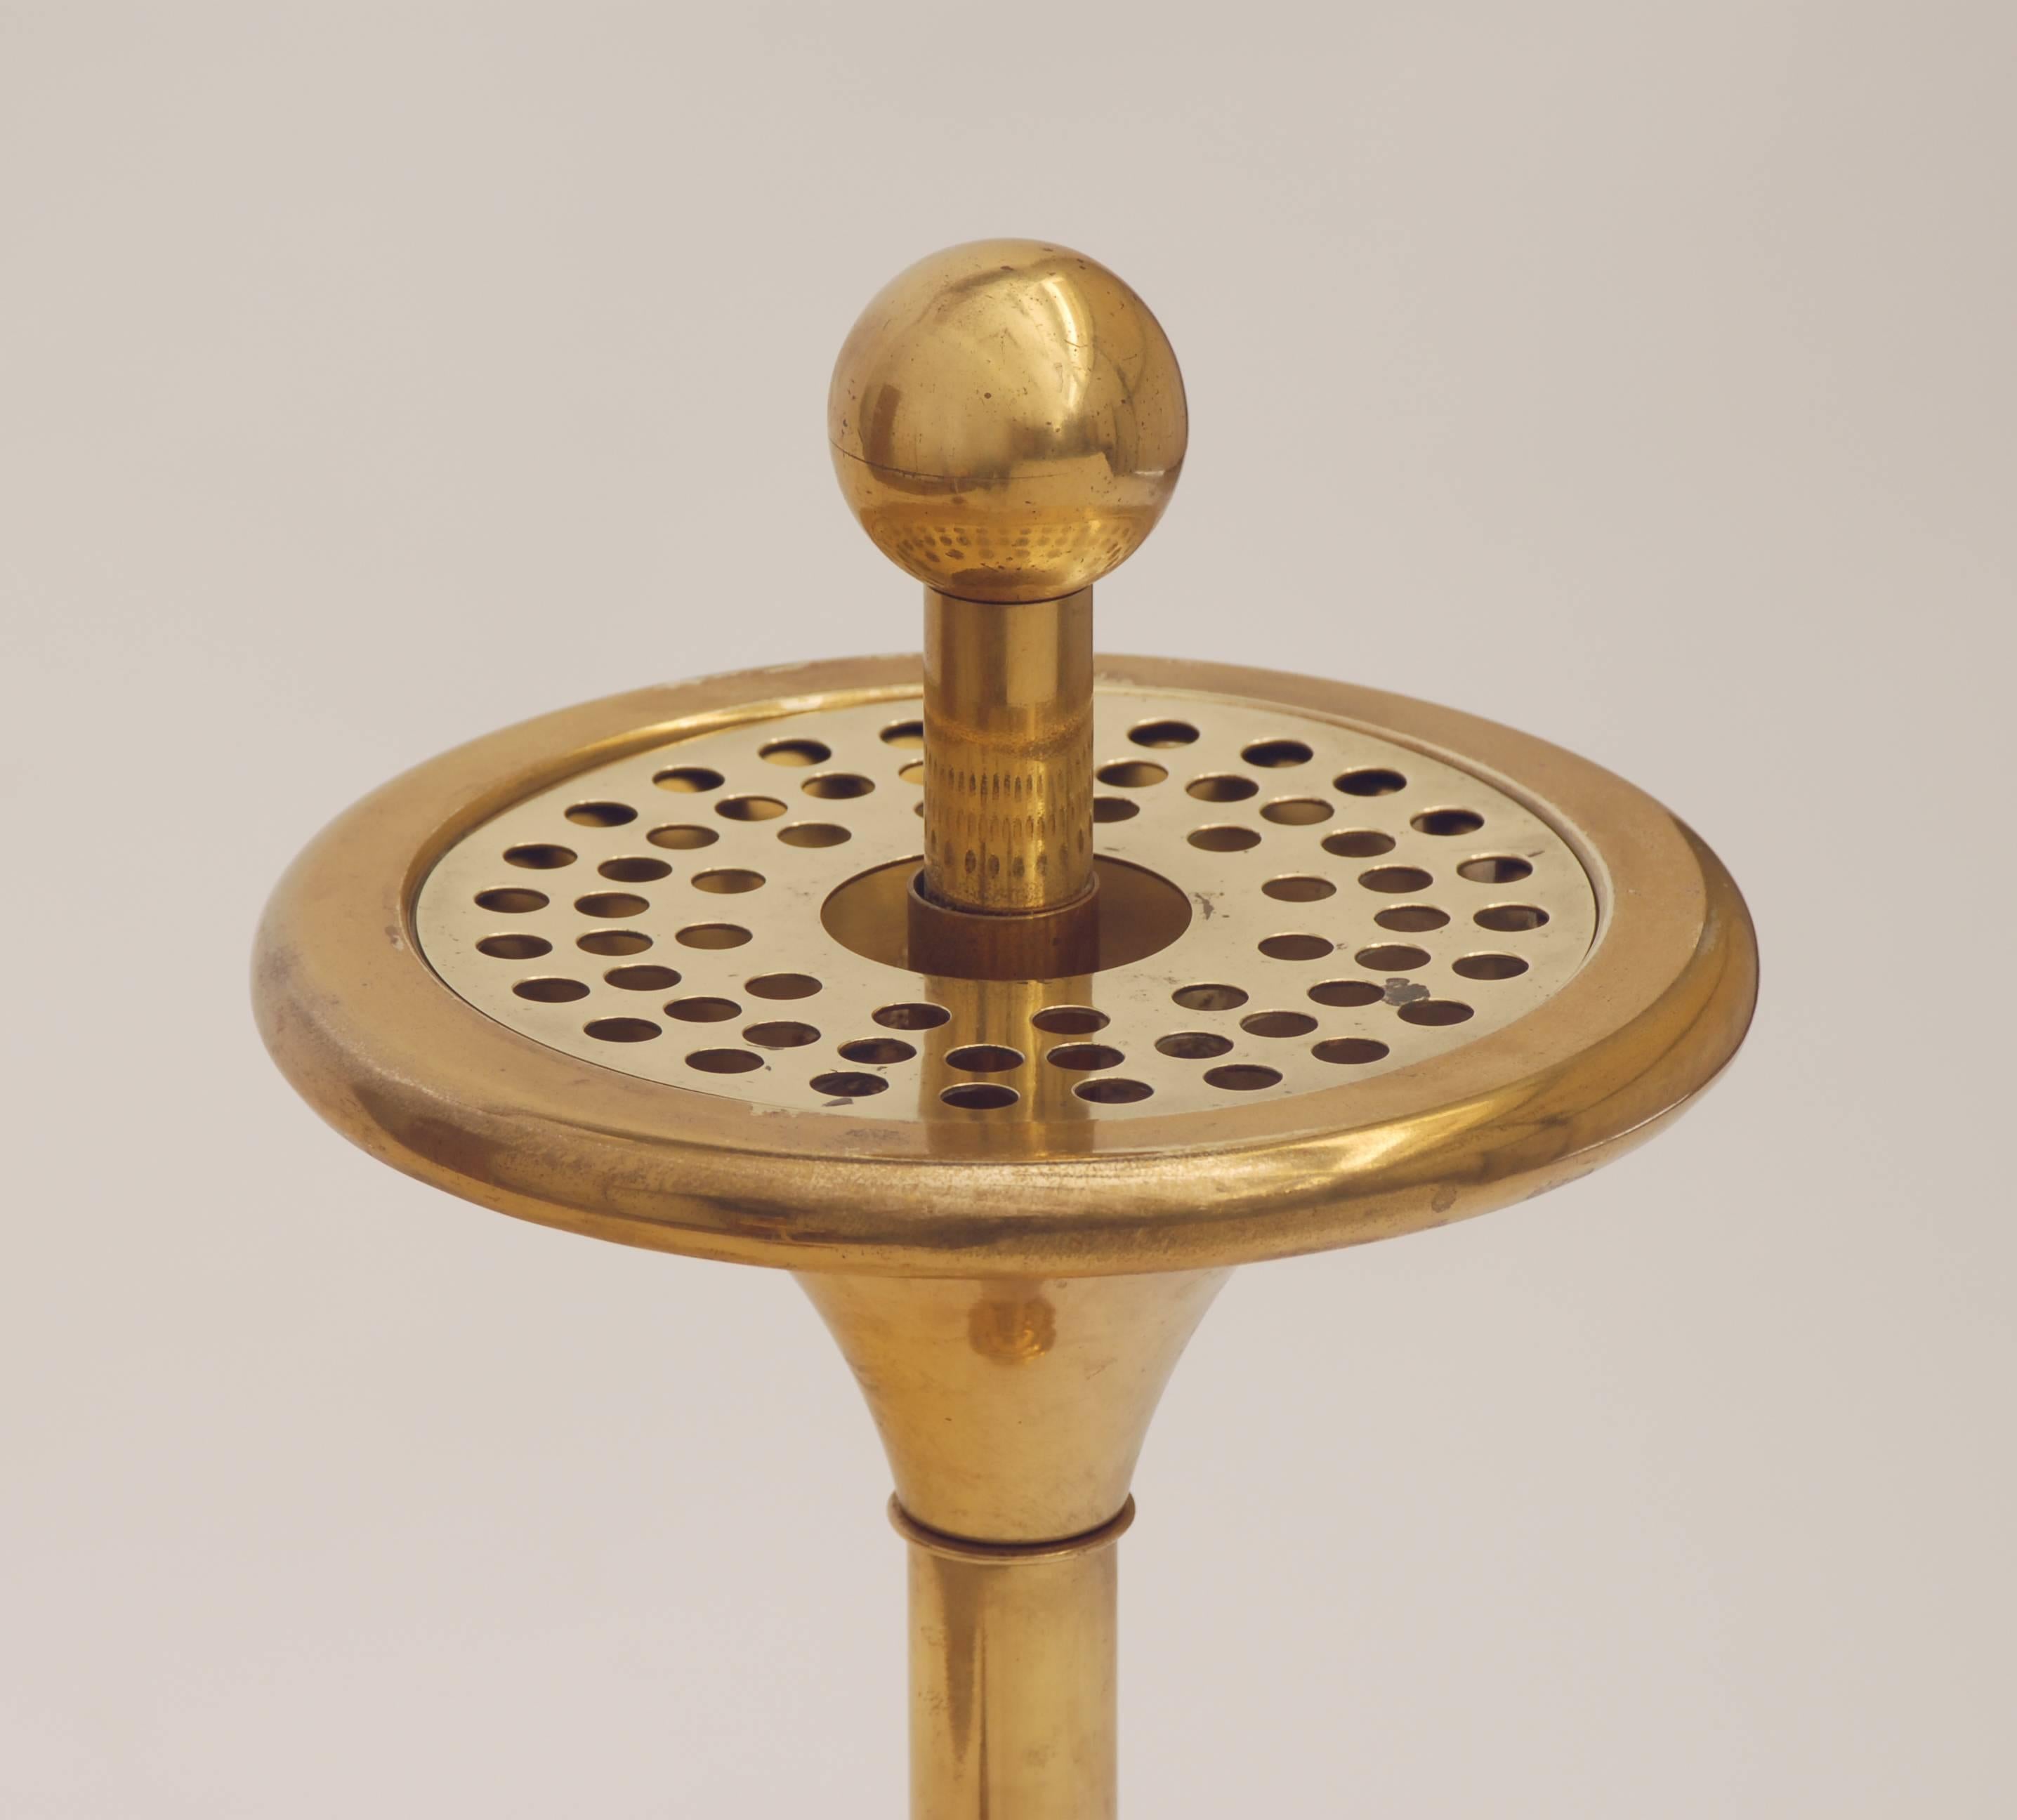 Floor ashtray stand, from brass, original condition. Made in Czechoslovakia, 1965.